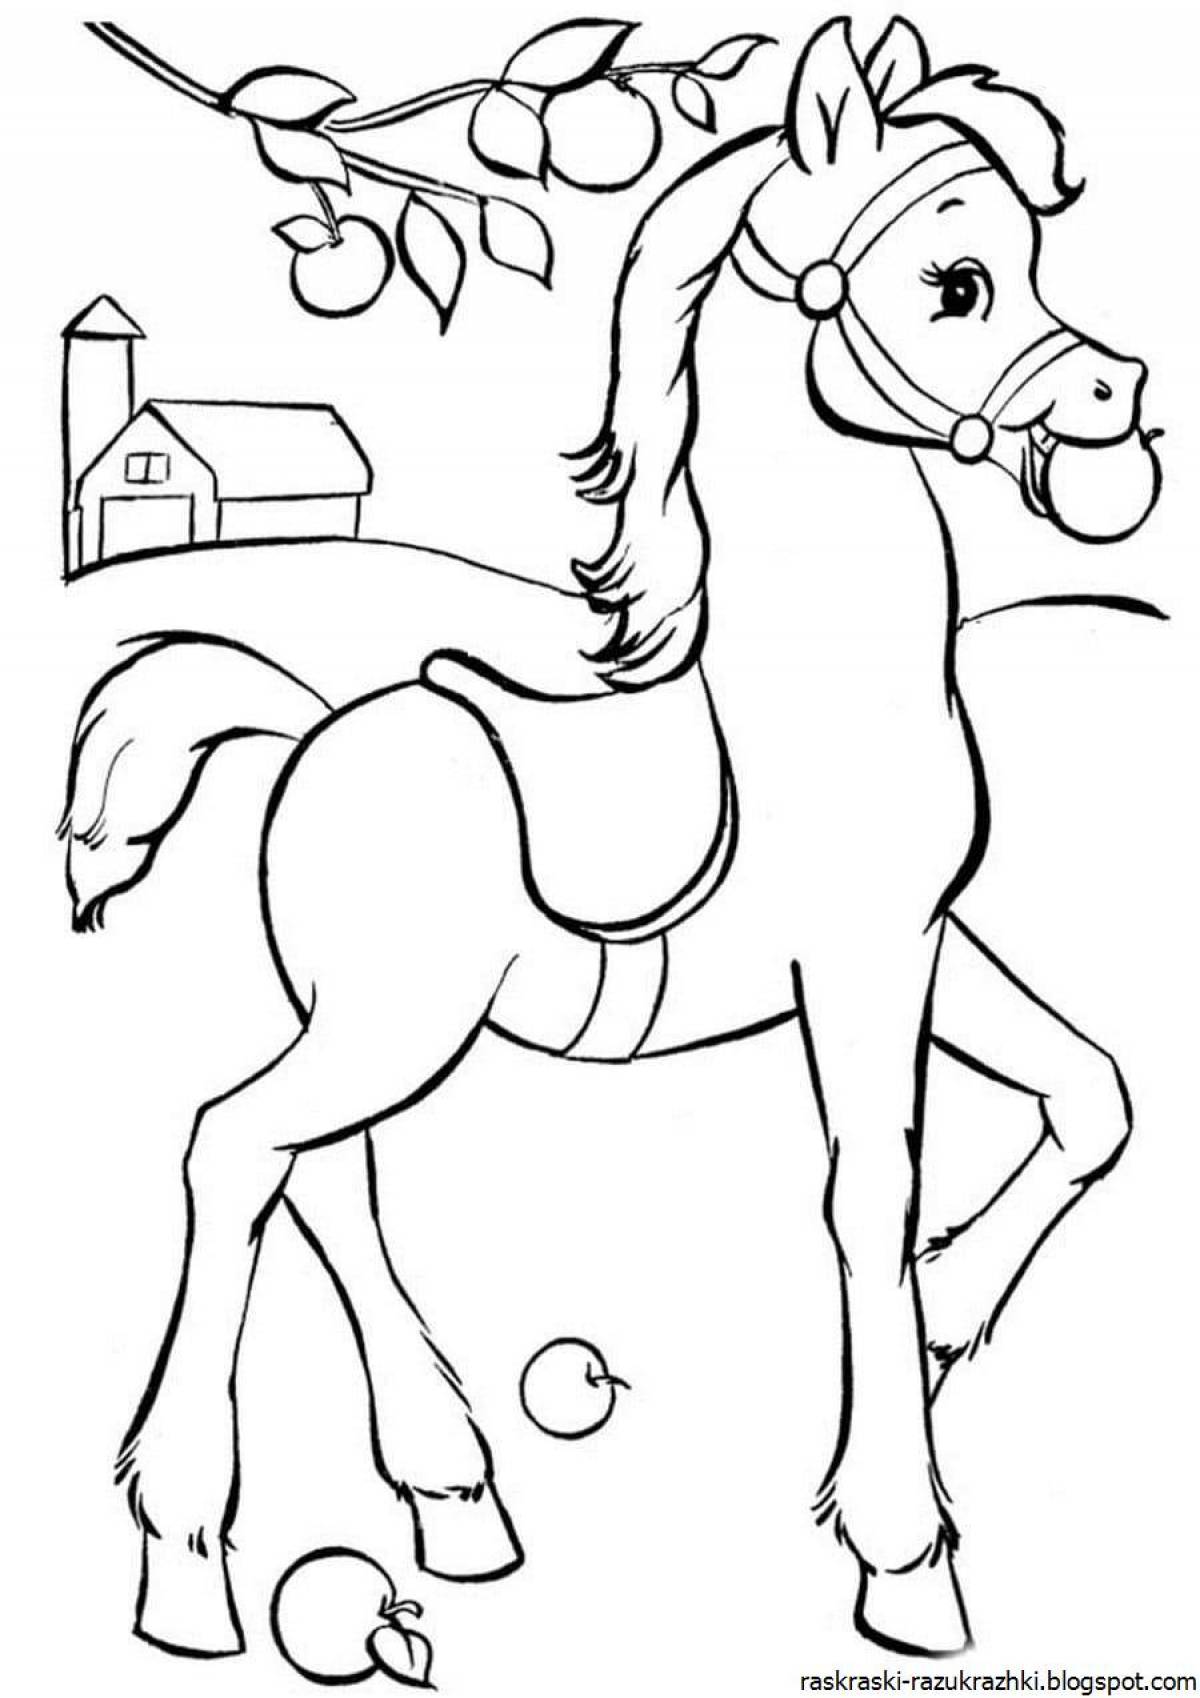 Bright coloring horse for kids